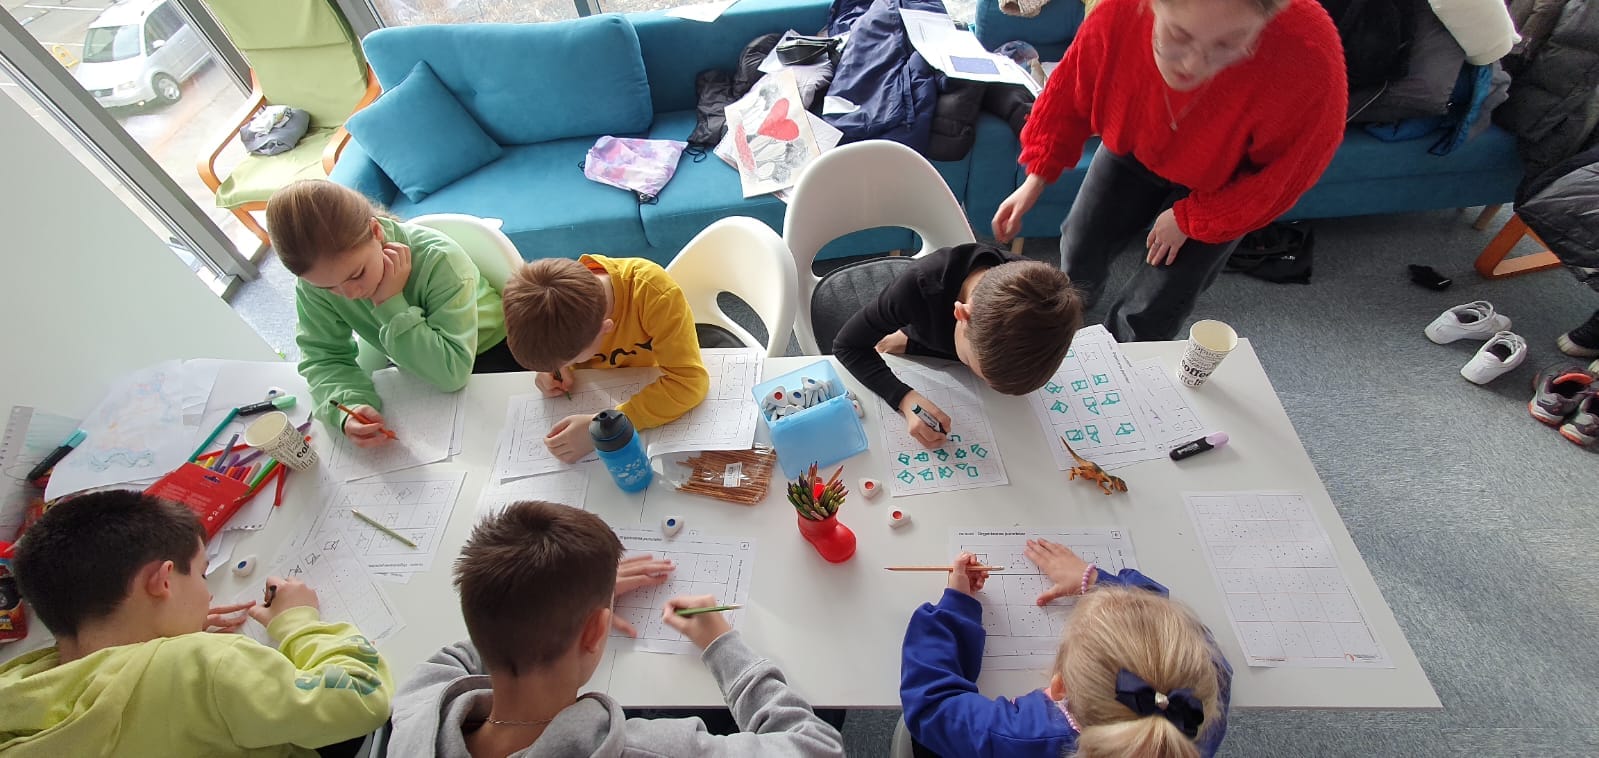 6 children pictured from above doing drawing and activities at a white table